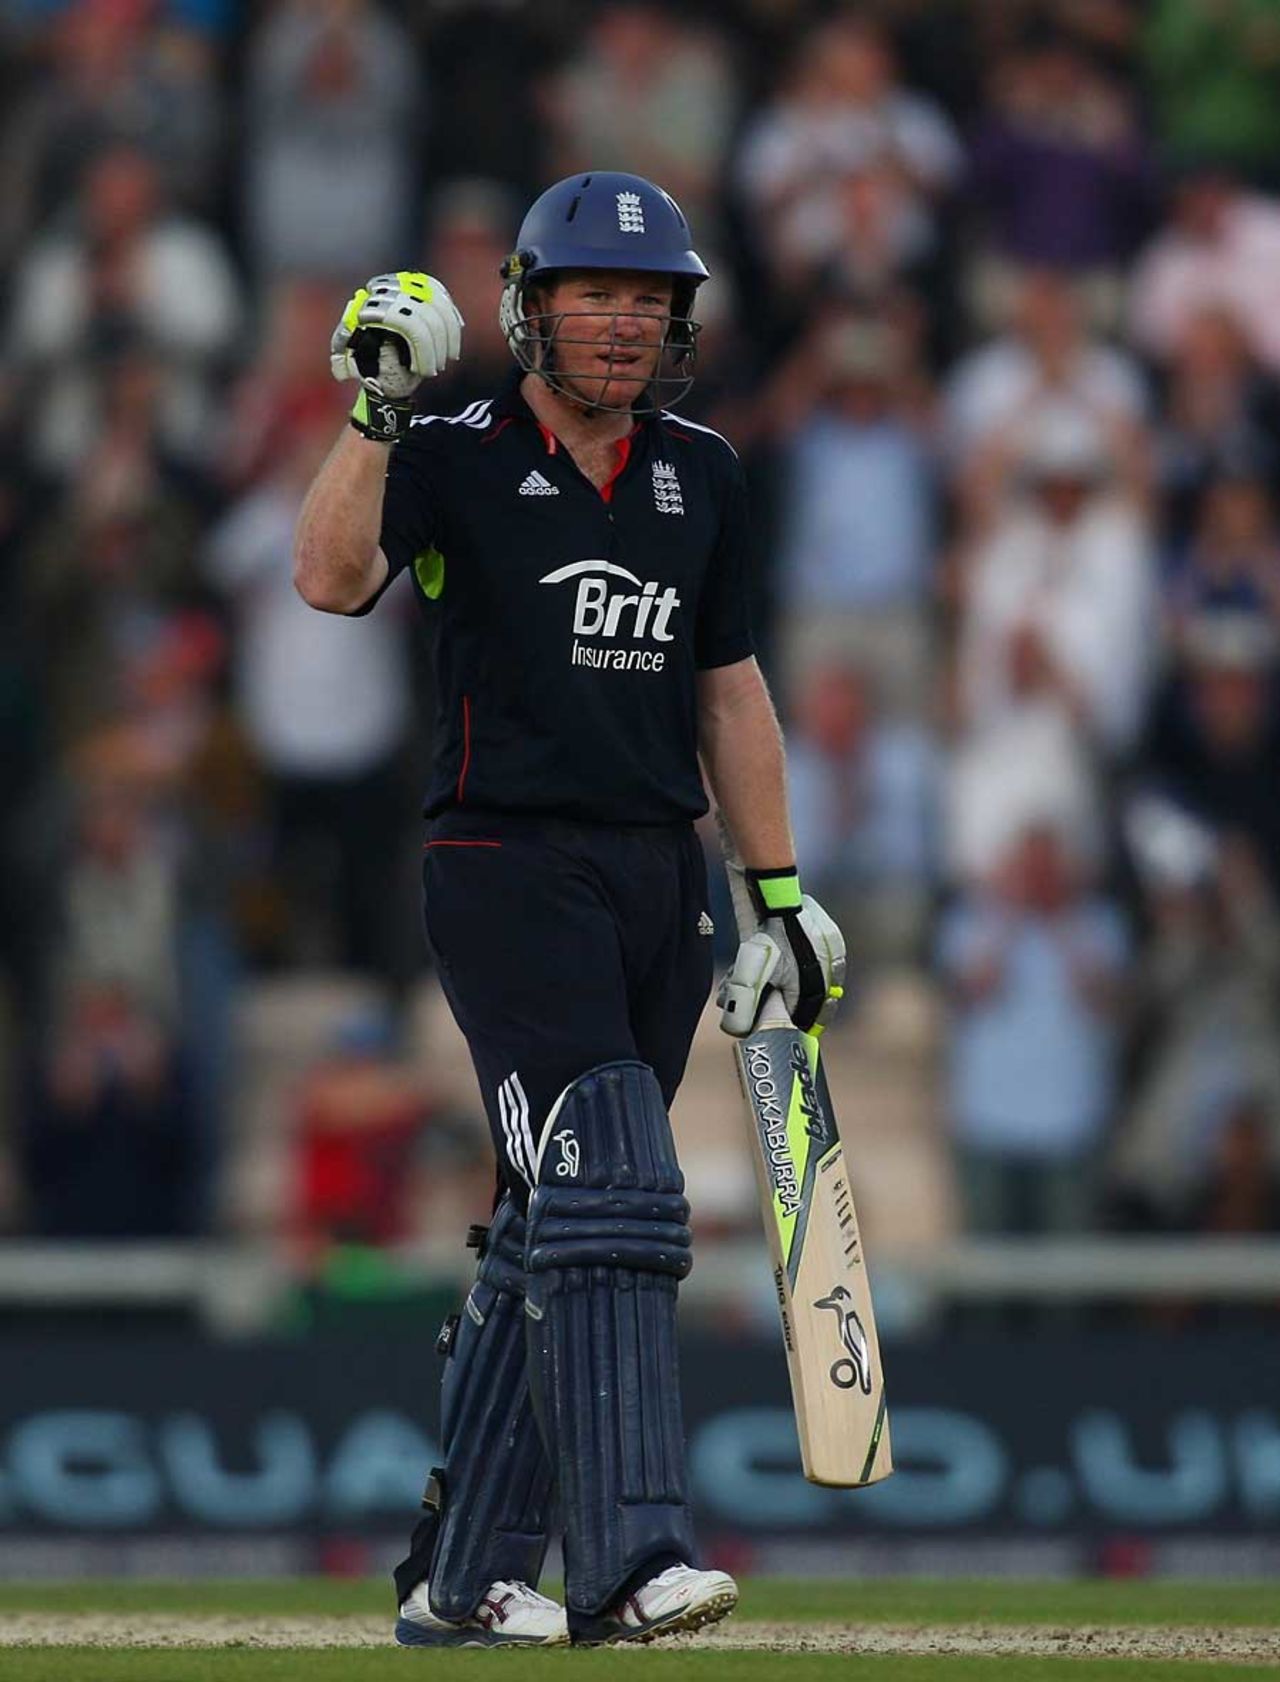 Eoin Morgan punches the air after reaching his hundred, England v Pakistan, 5th ODI, Rose Bowl, September 22, 2010